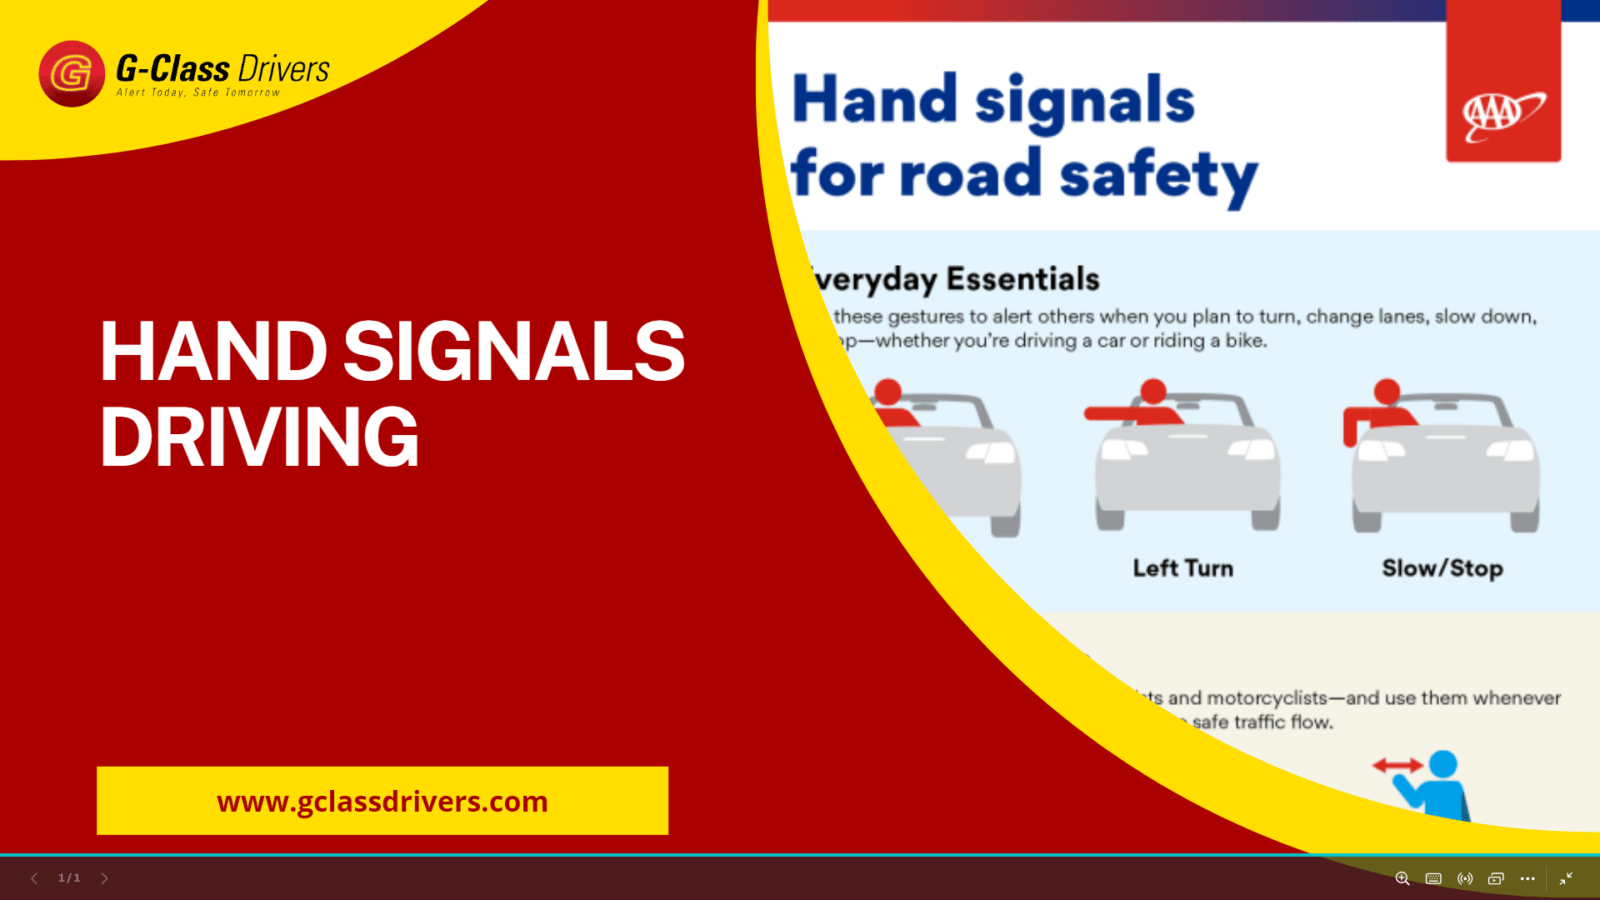 What Are the 5 Hand Signals for Driving a Car?